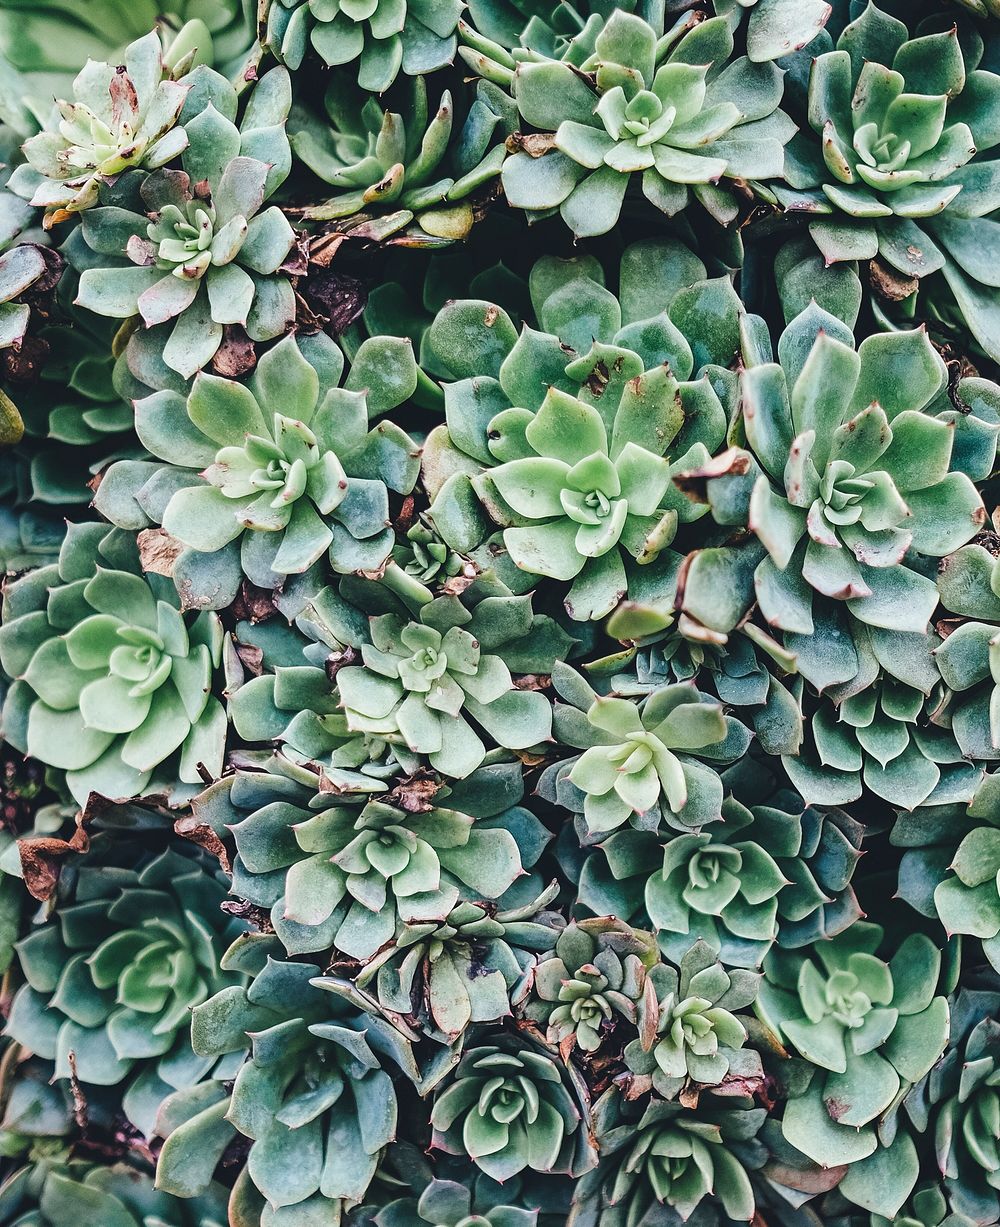 Green succulents. Original public domain image from Wikimedia Commons